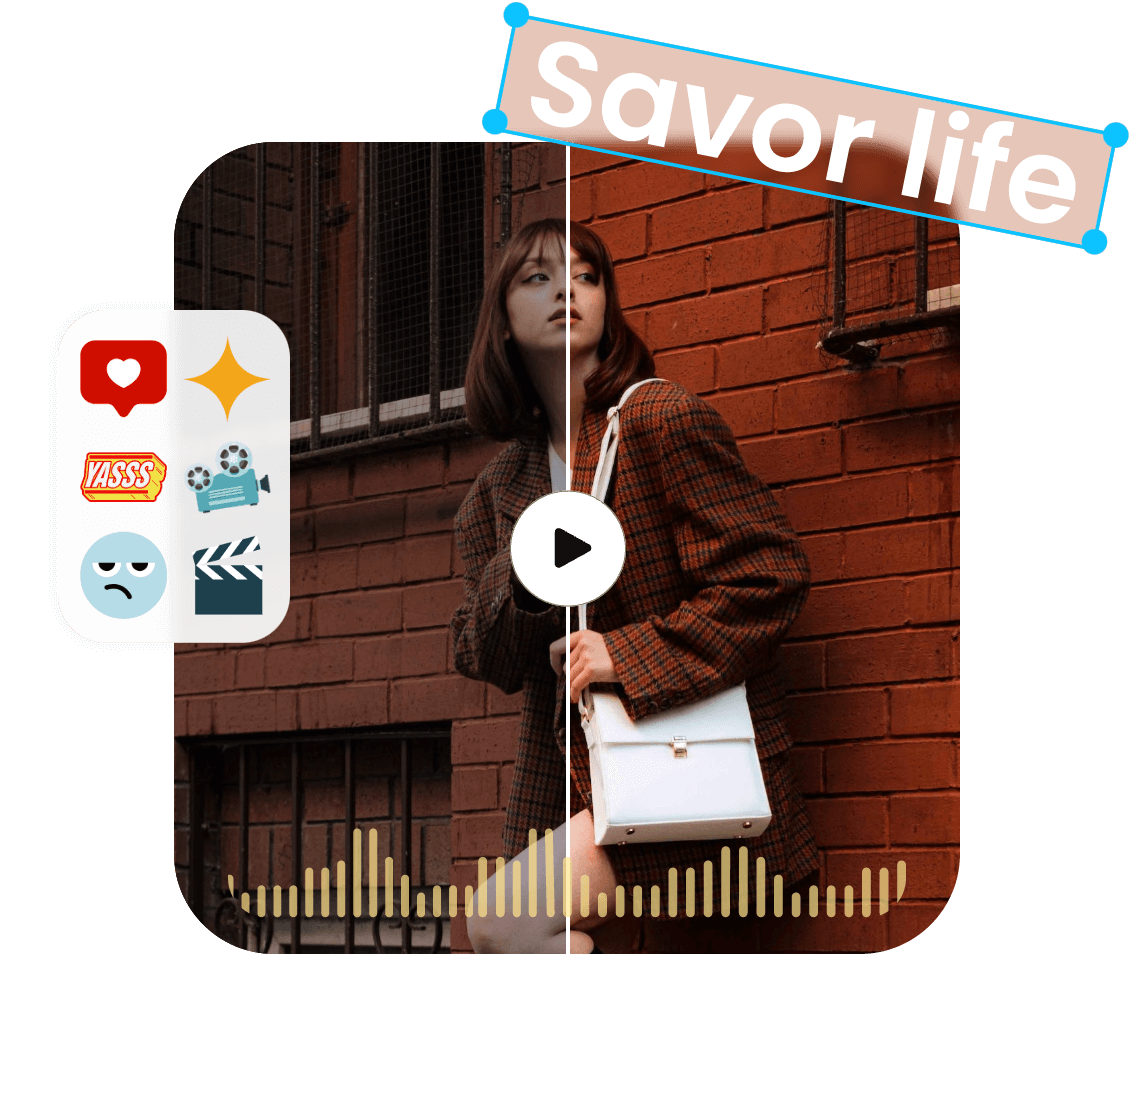 Enhance a video by adding text, stickers, music using Clipfly